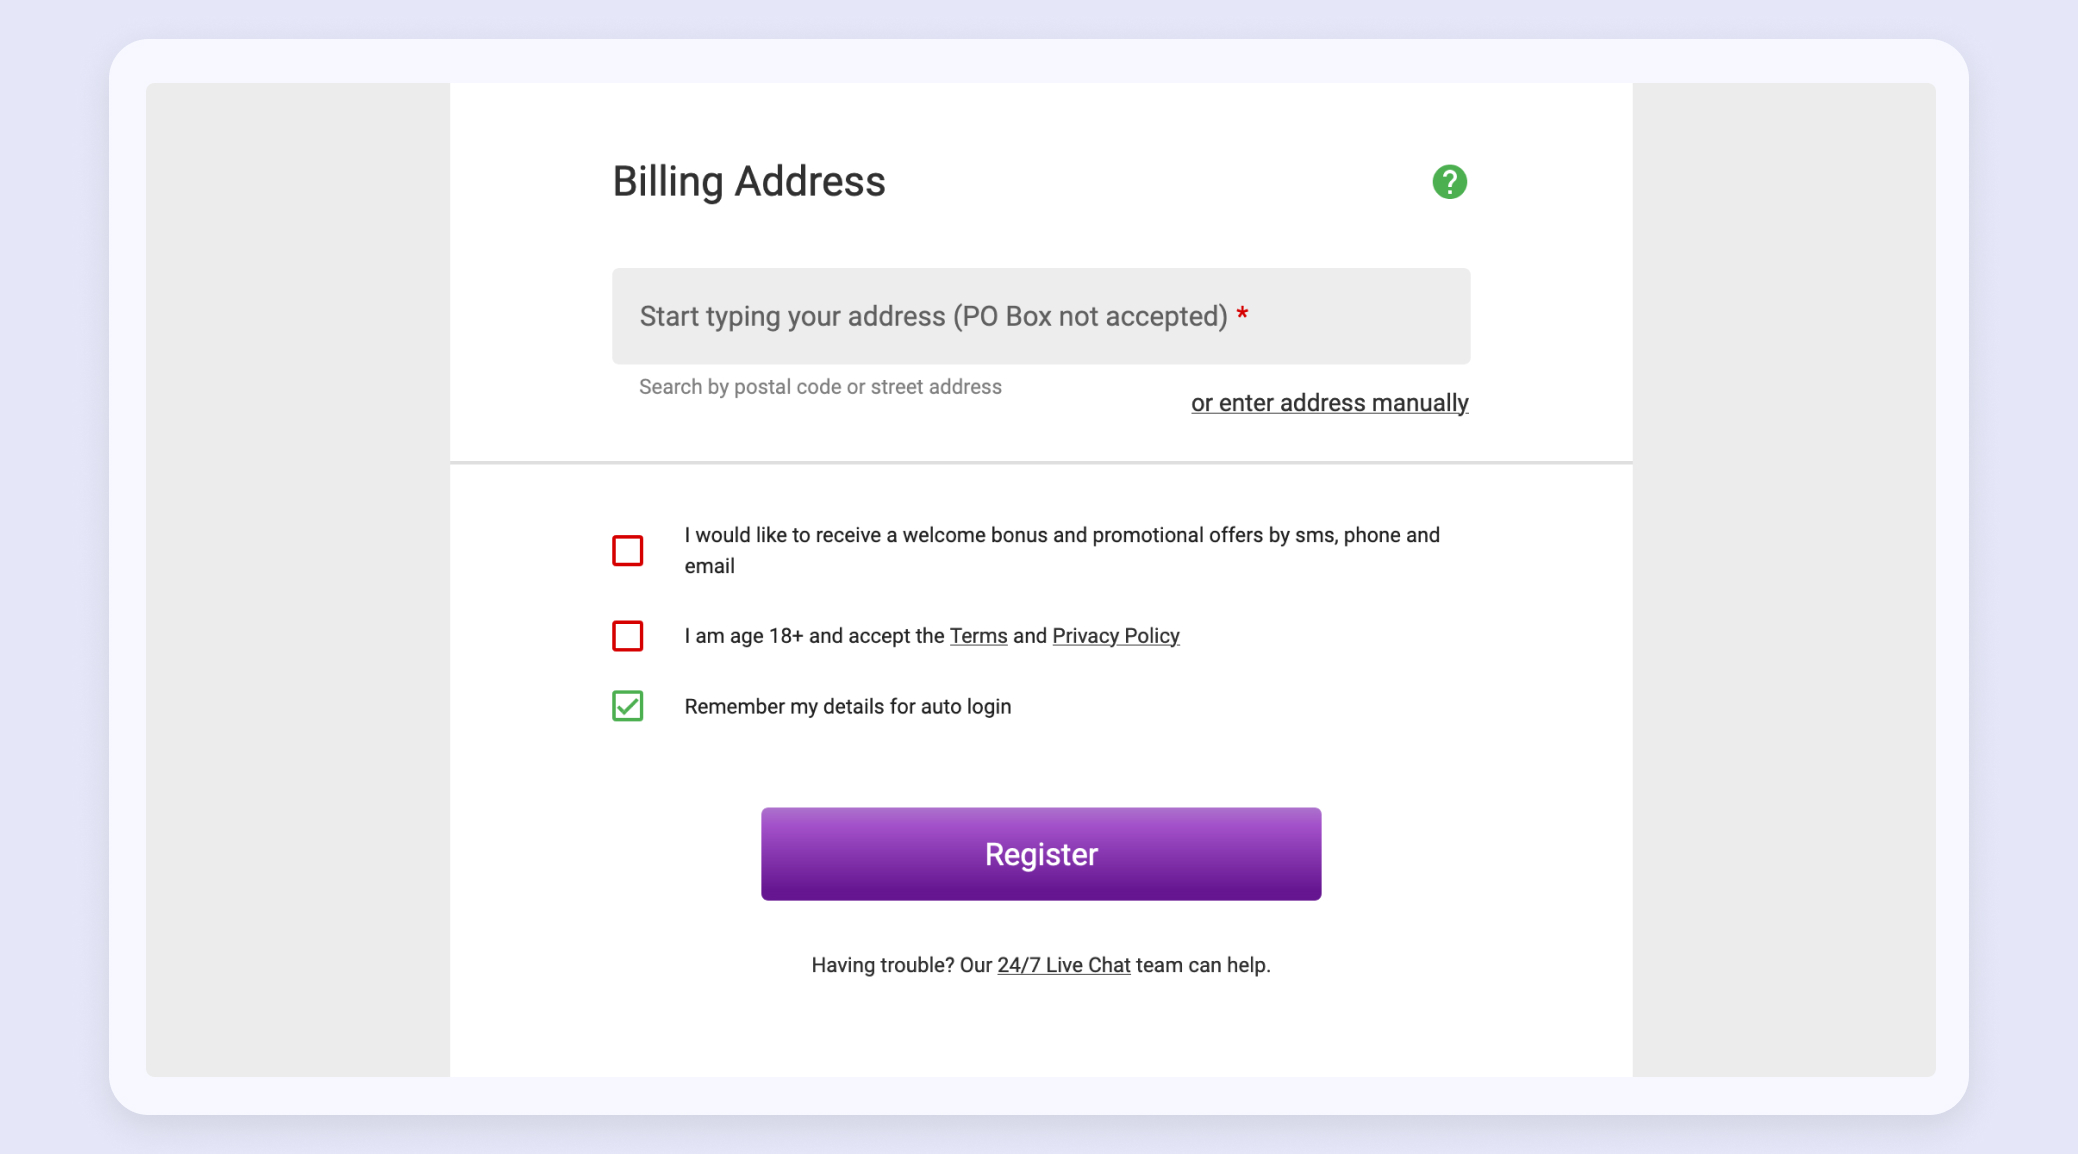 5. Enter your billing address and opt-in to receive bonuses and promotions